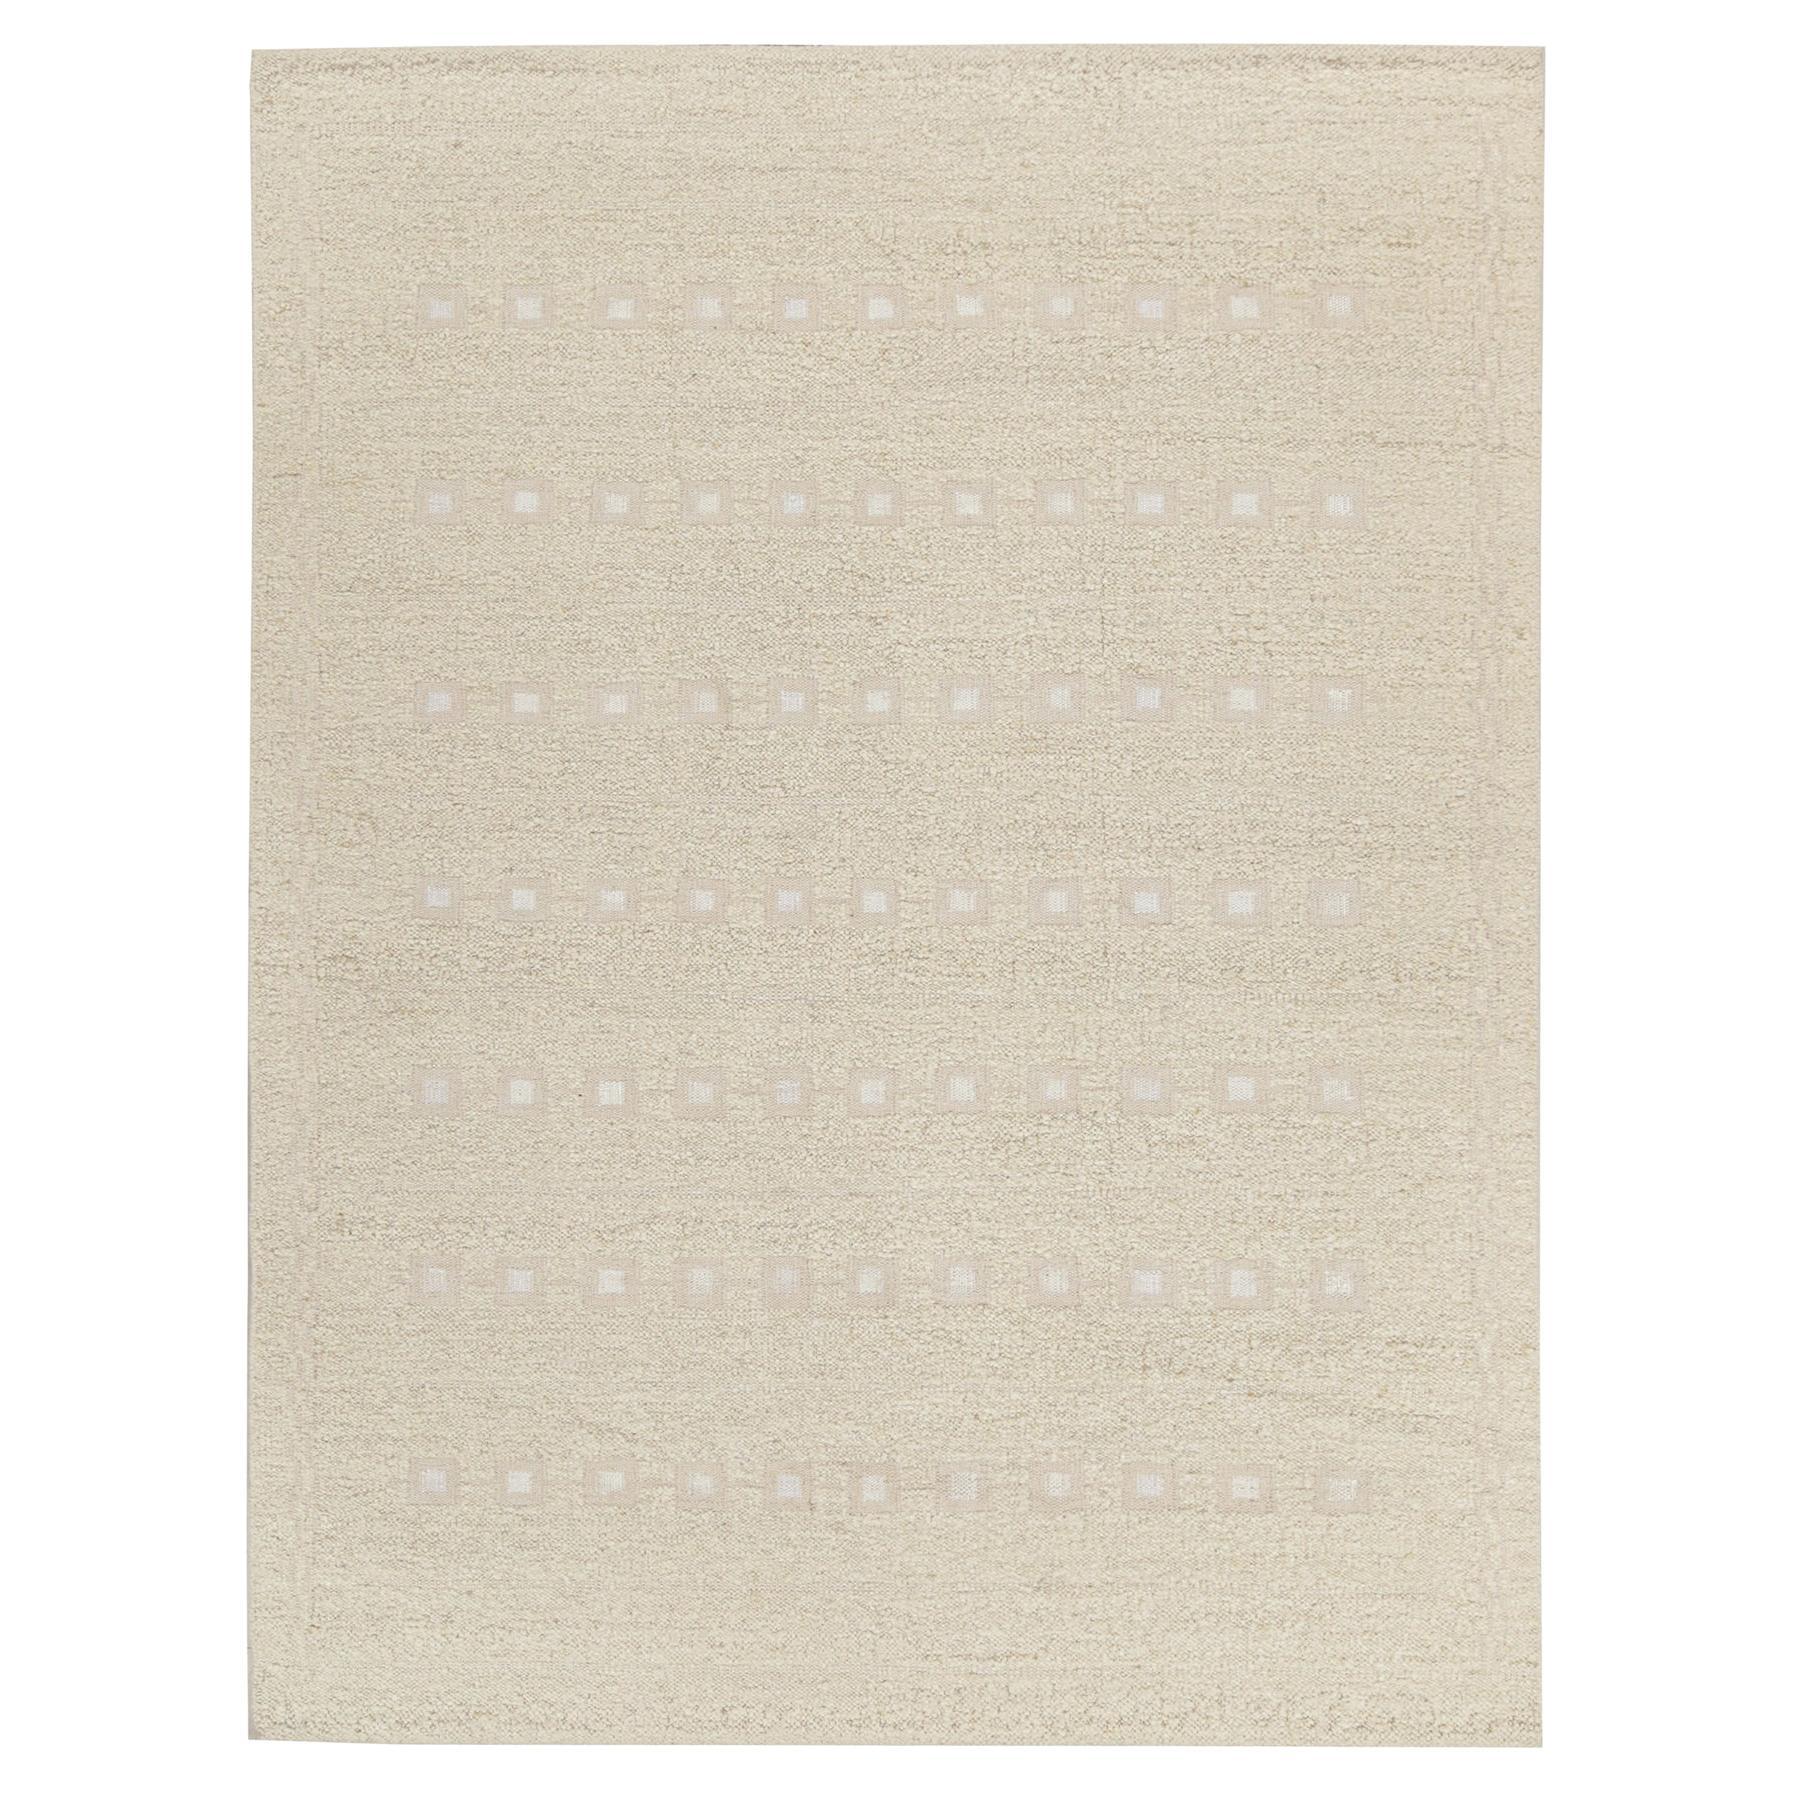 Rug & Kilim’s Scandinavian Style Kilim with Patterns in Beige & White For Sale